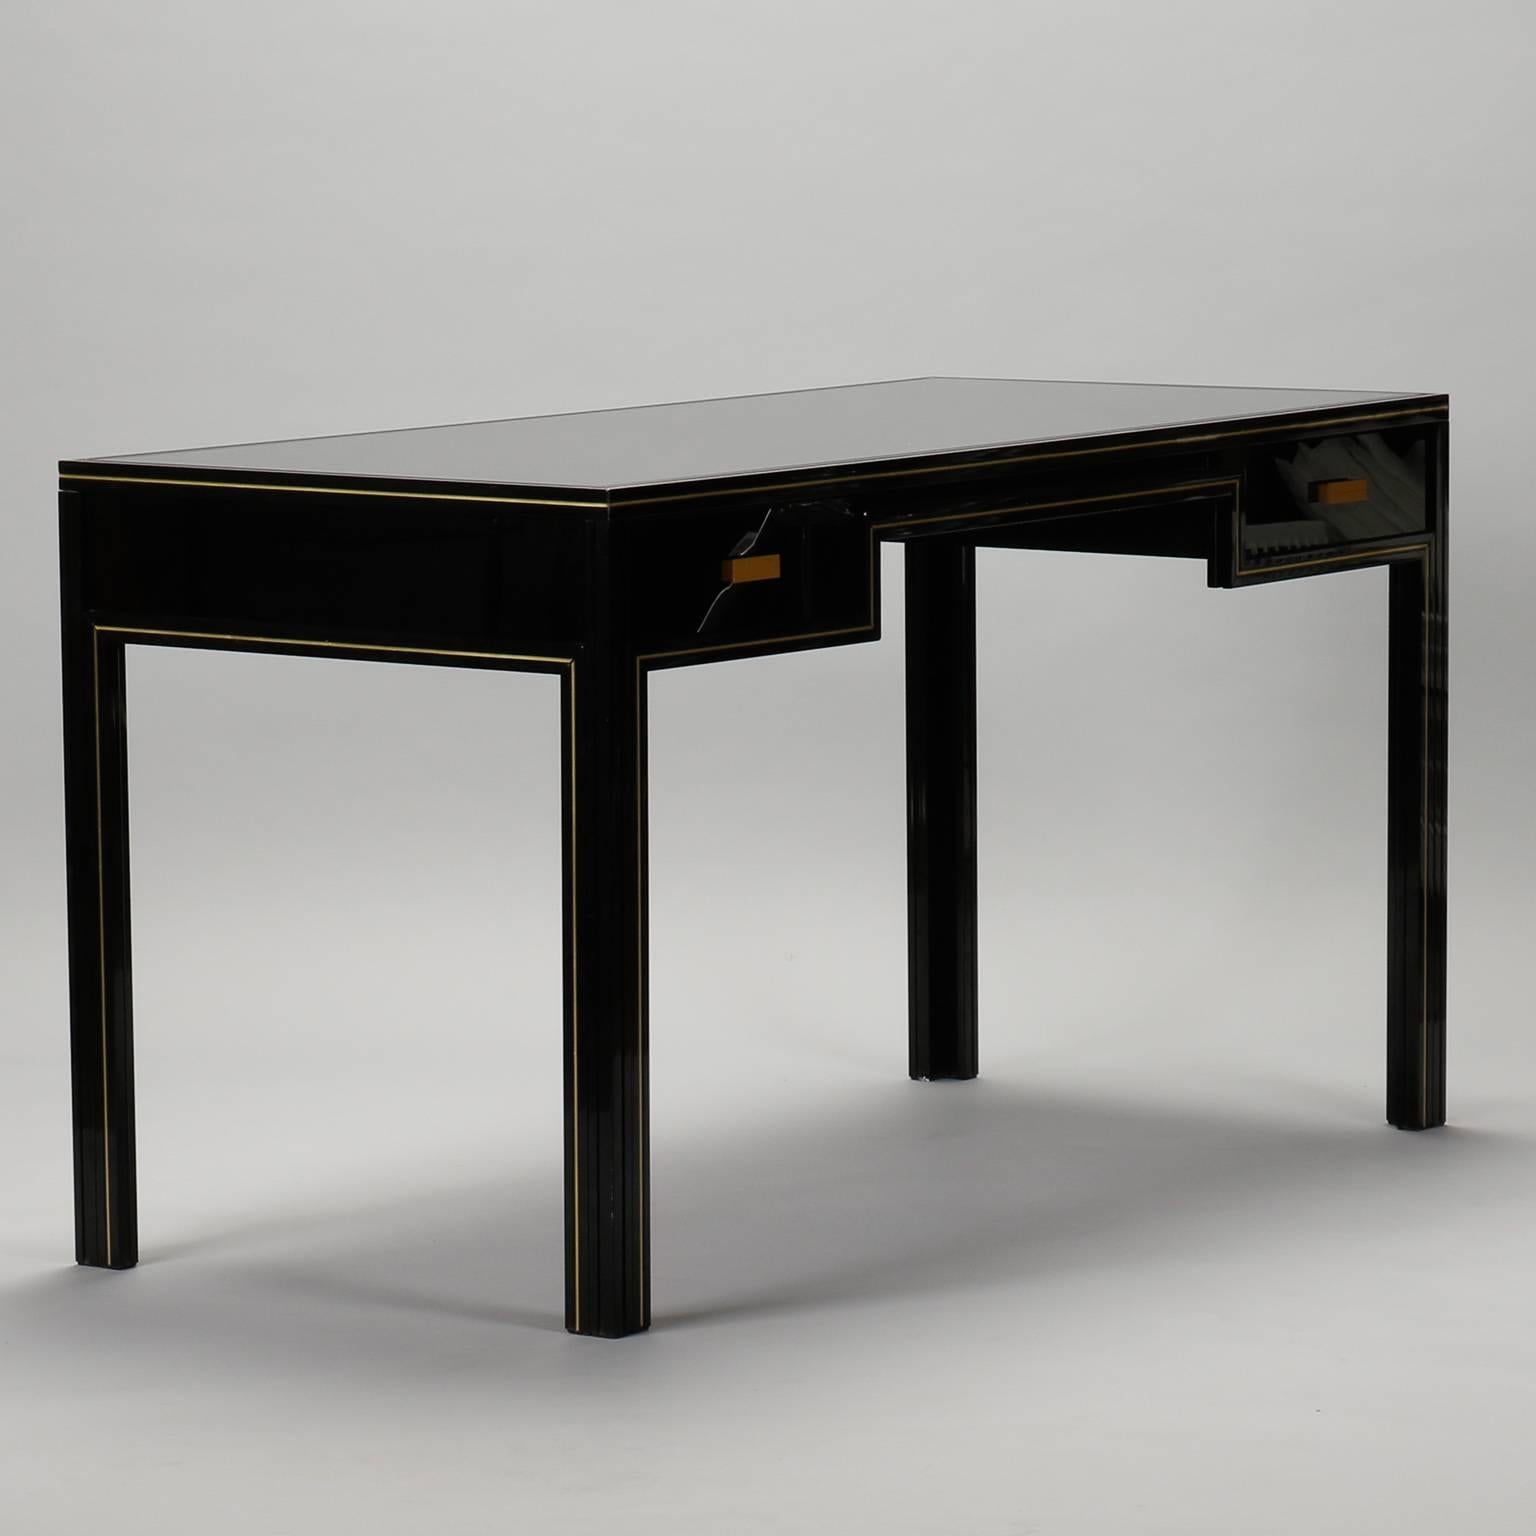 20th Century Pierre Vandel Black Lacquered and Brass Desk